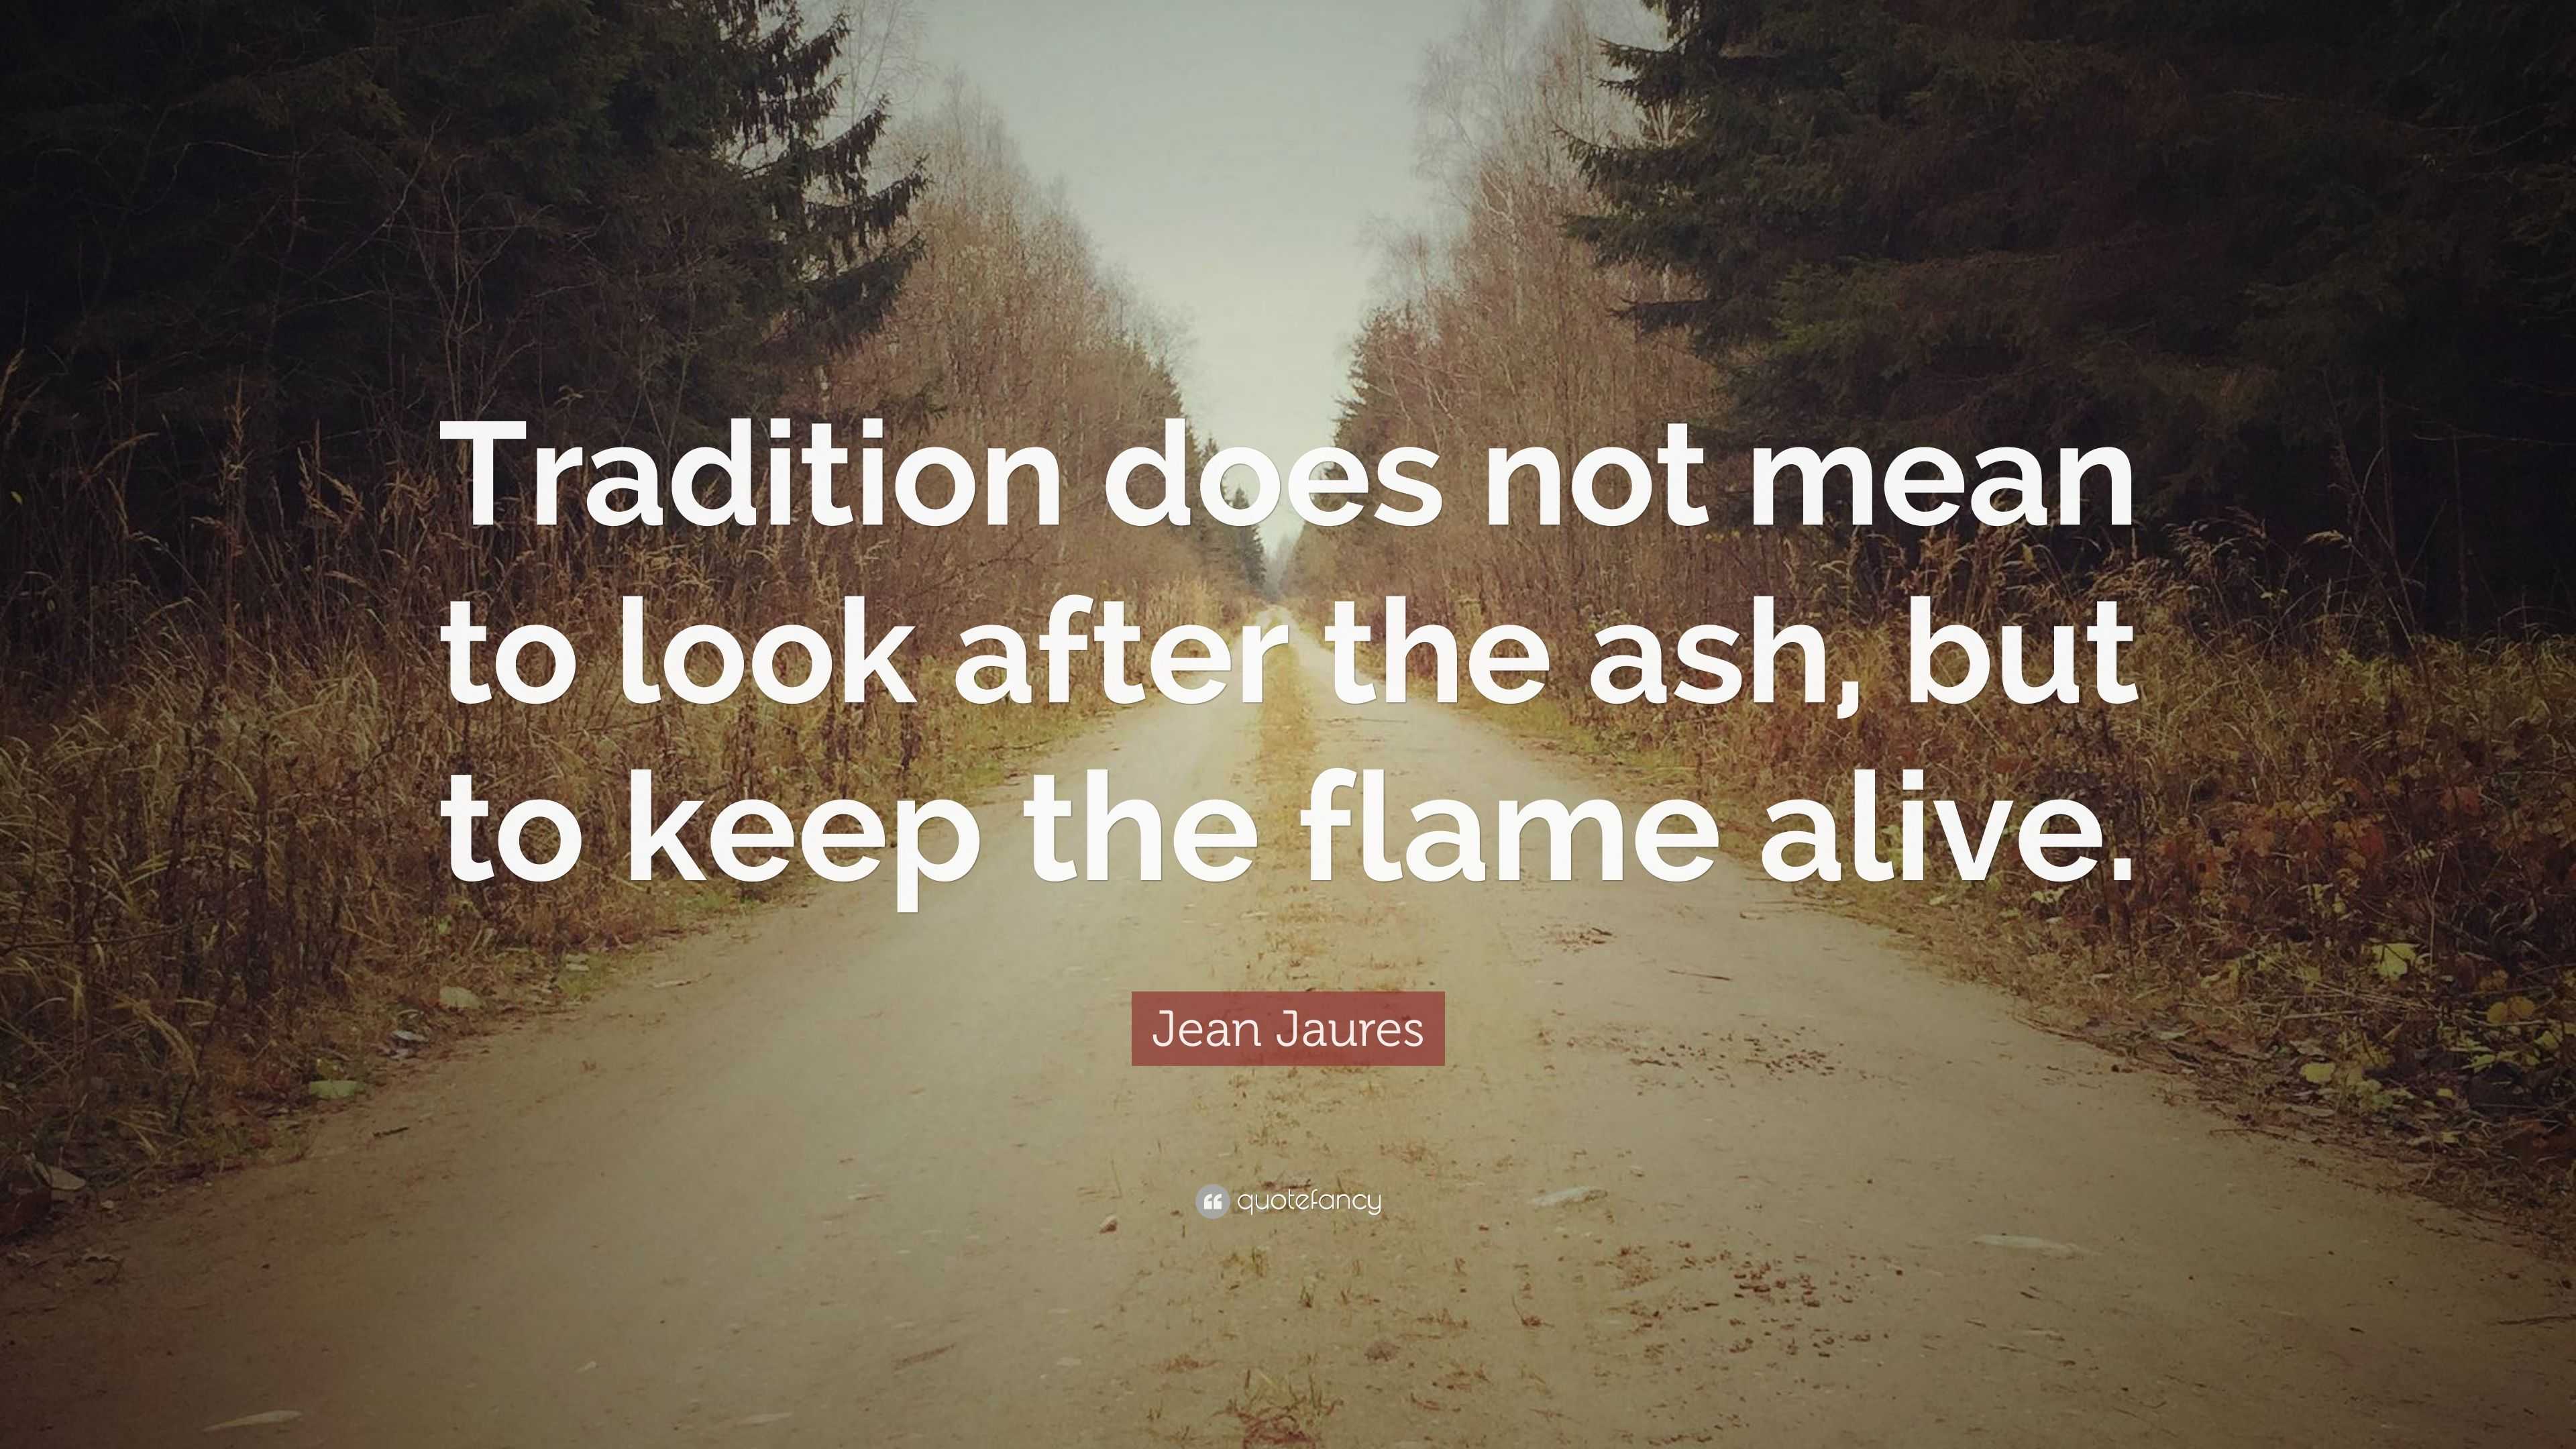 Jean Jaures Quote “tradition Does Not Mean To Look After The Ash But To Keep The Flame Alive”